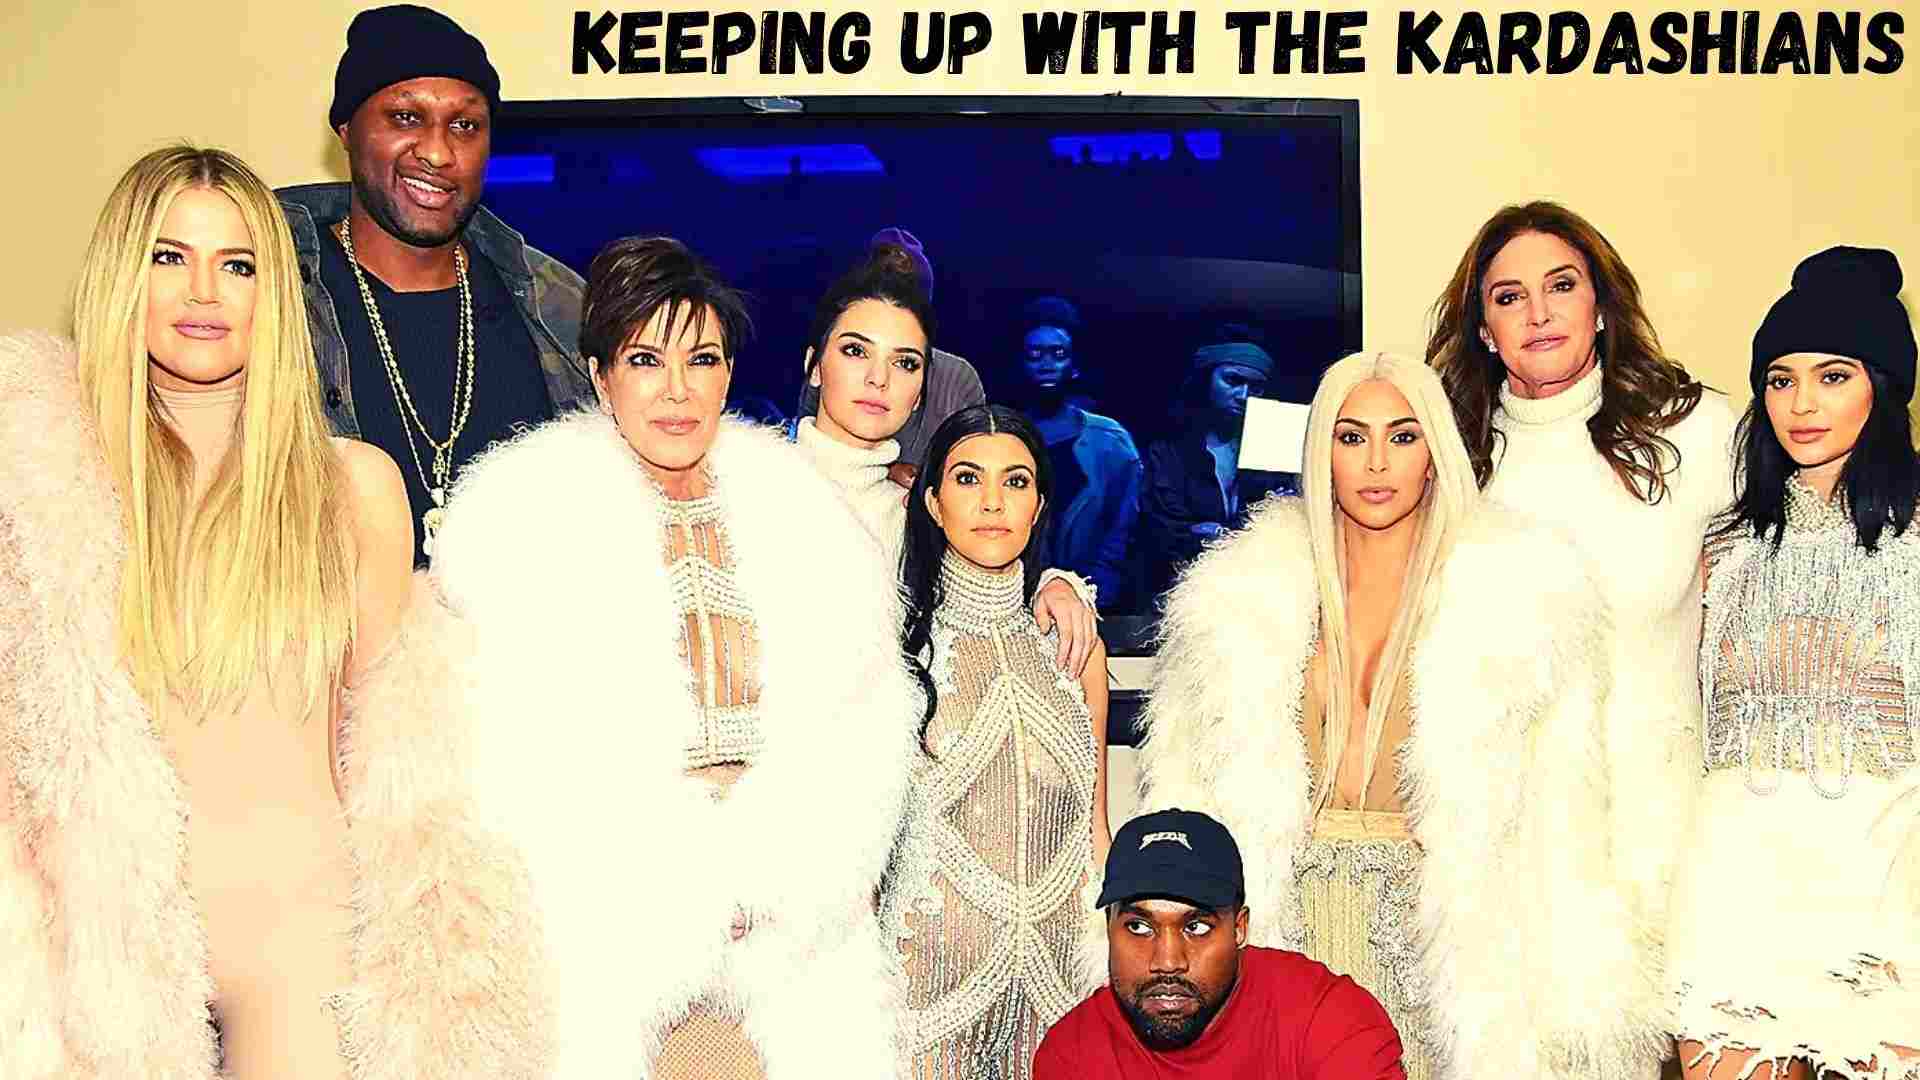 Where to watch Keeping up with the Kardashians Wallpaper and images